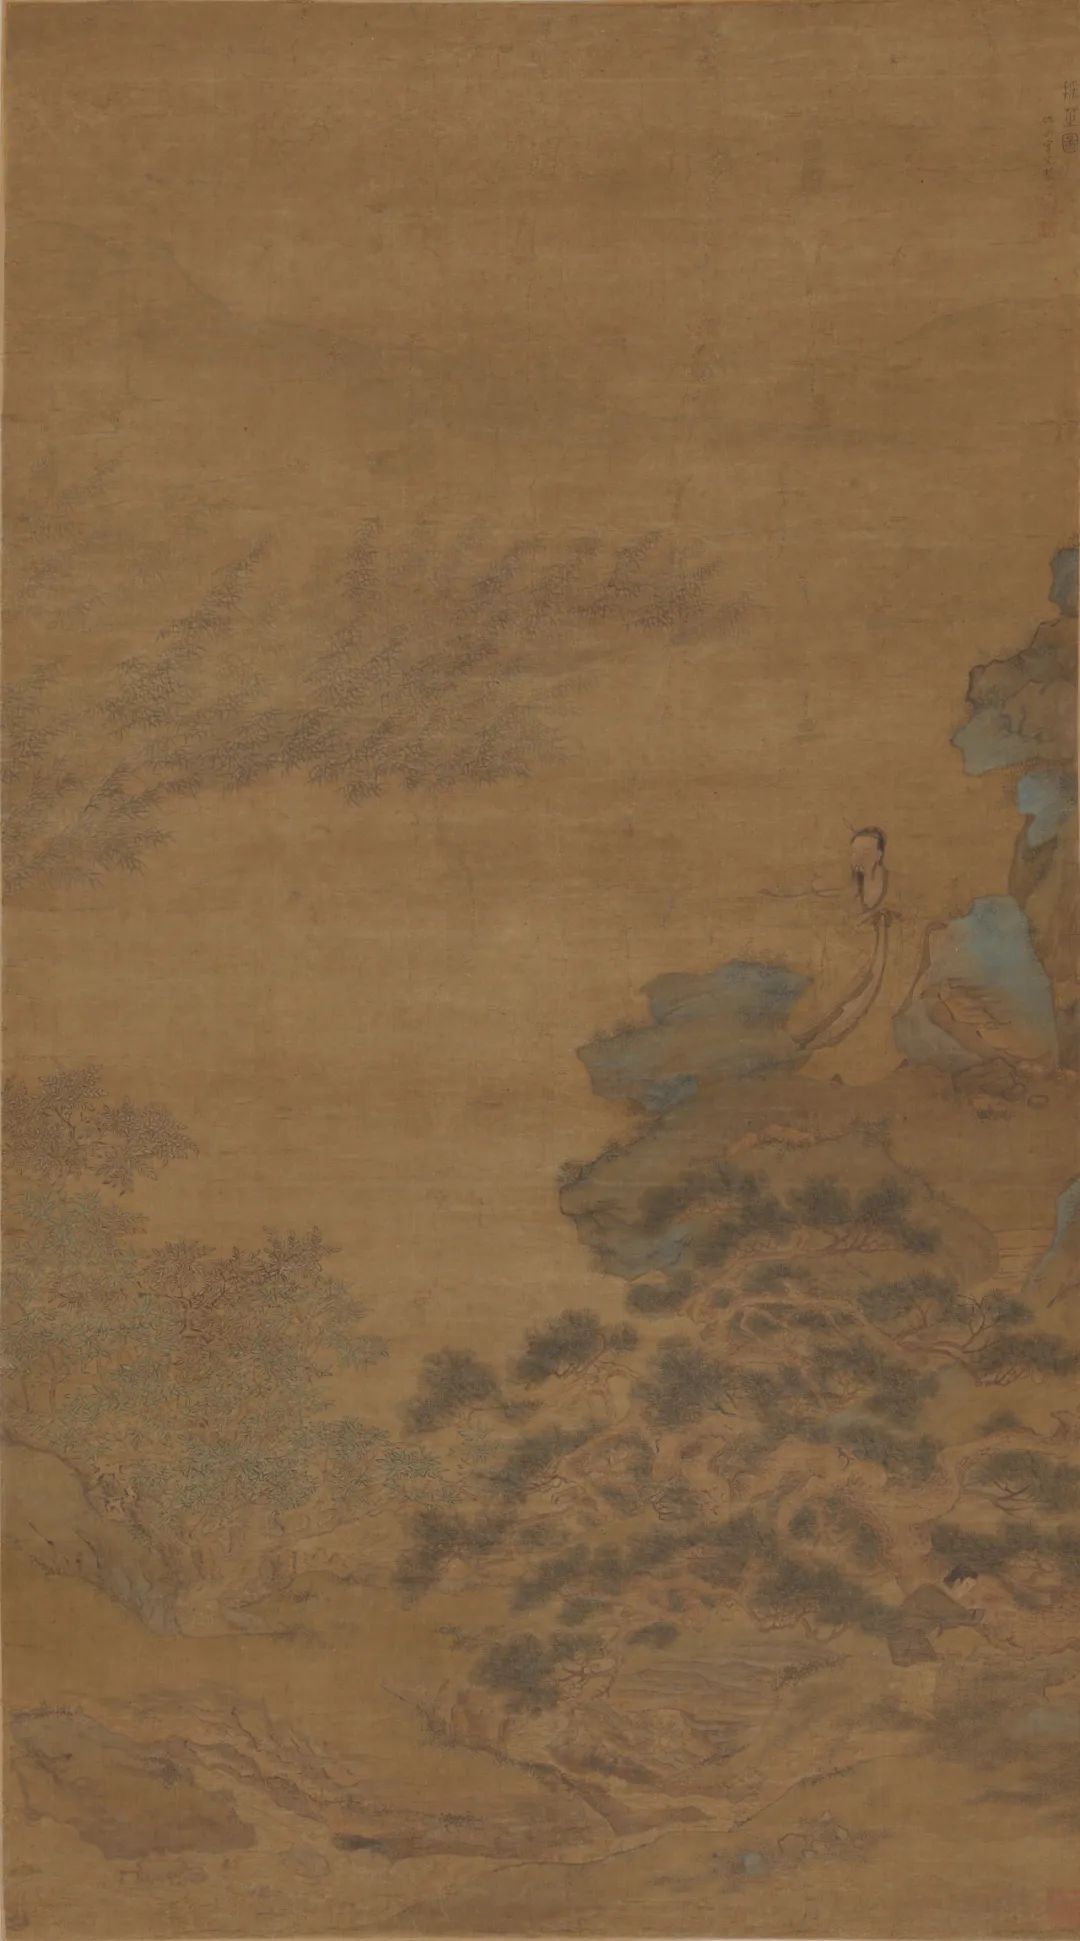 Ming Qiuying's "Picture of Caizhi"